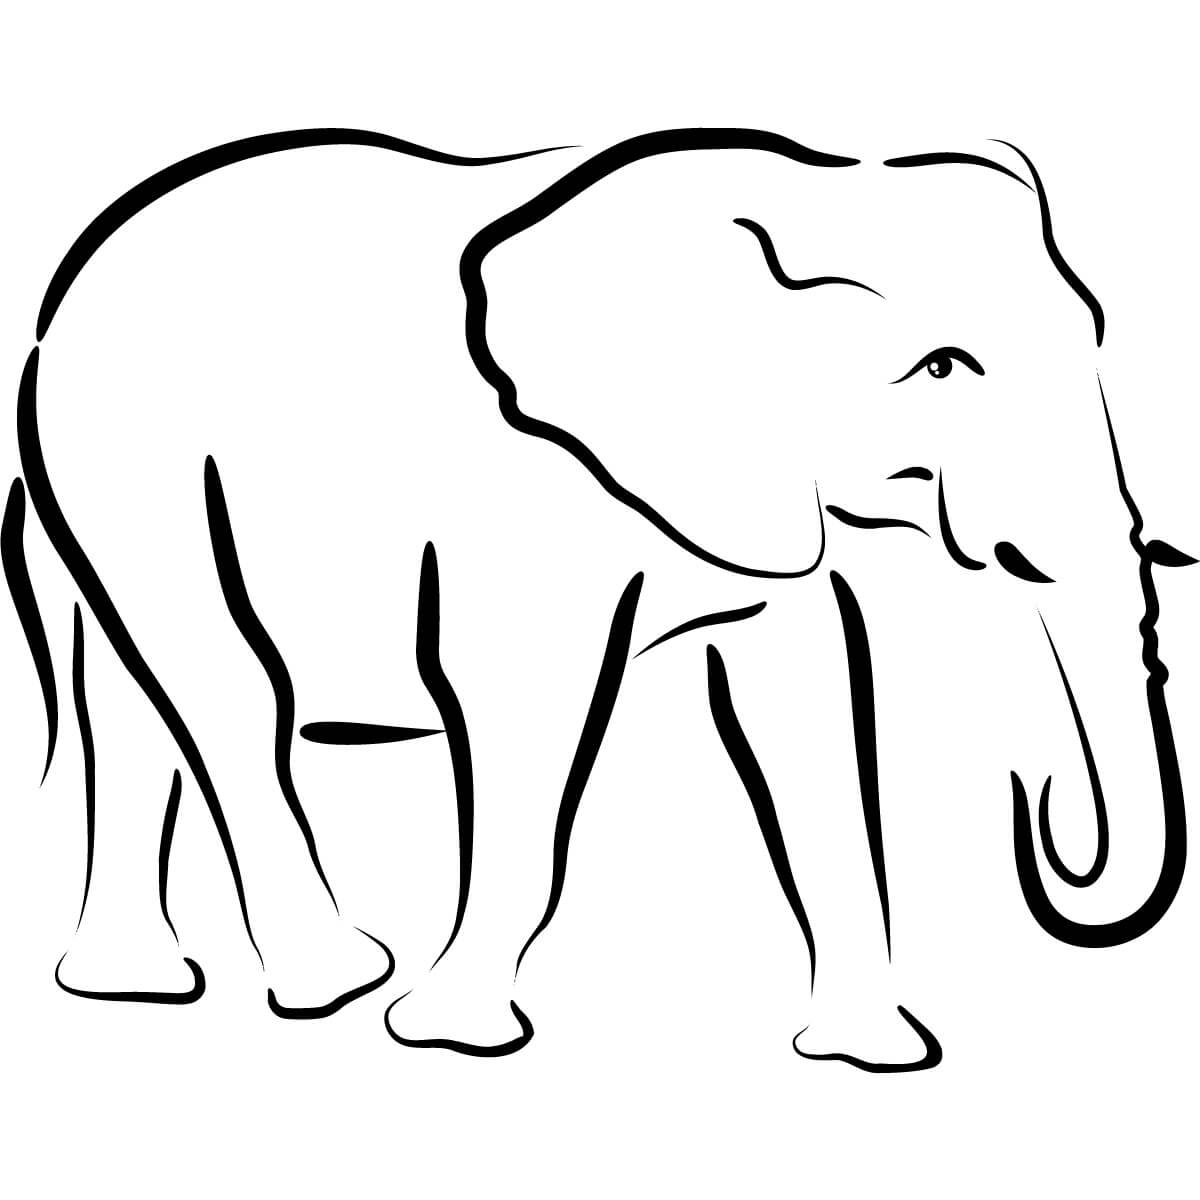 Free Simple Elephant Outline, Download Free Clip Art, Free For Blank Elephant Template